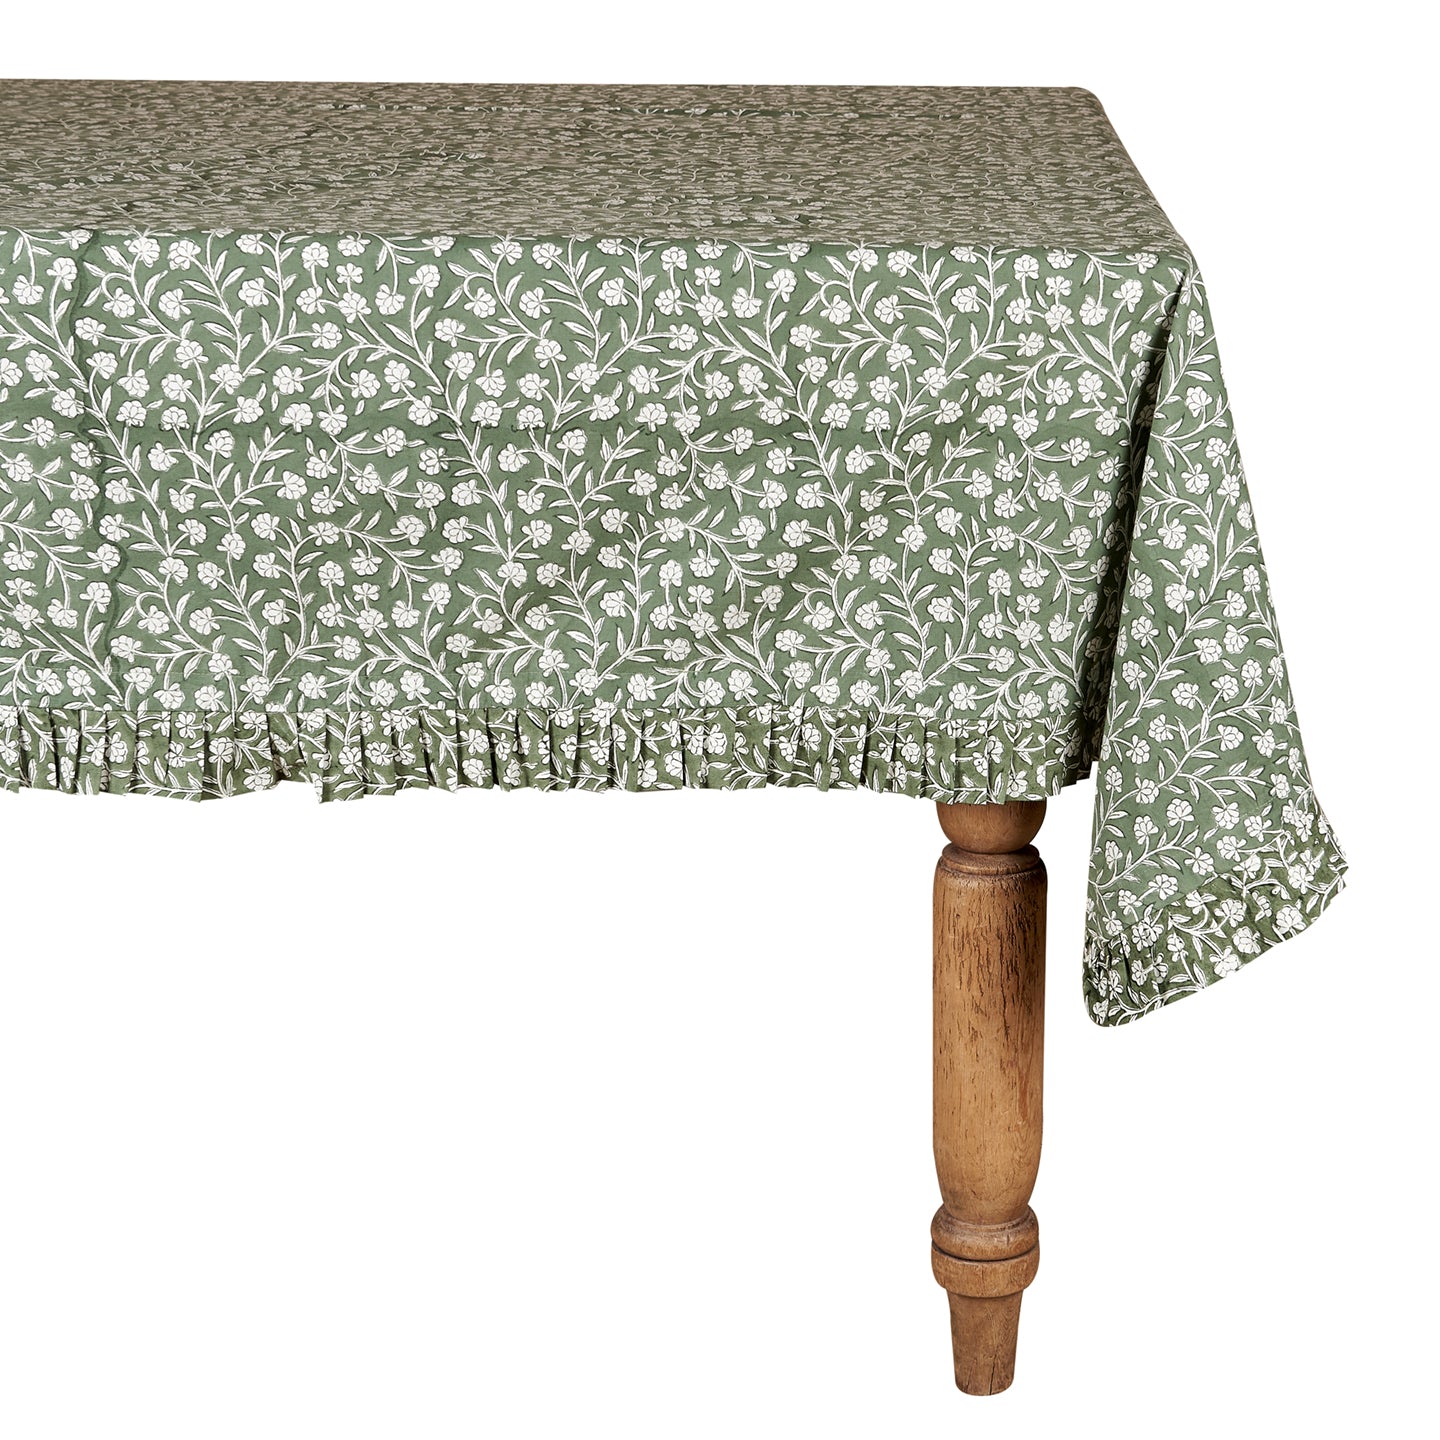 Green Floral Cotton Tablecloth